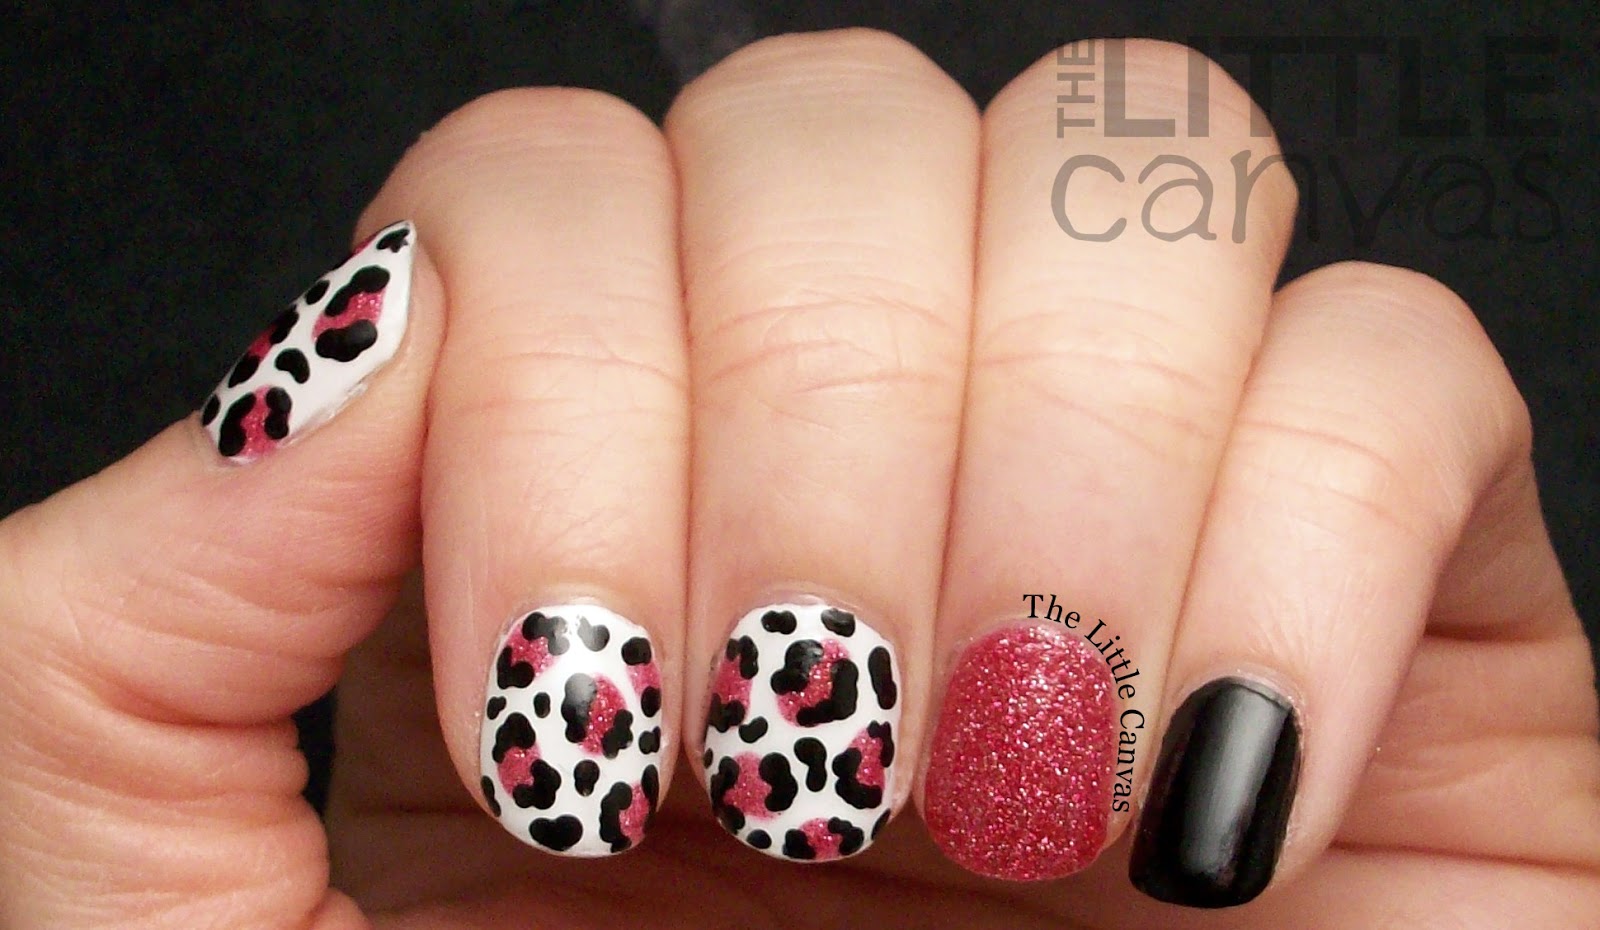 Leopard Print Manicure with a Pixie Dust! - The Little Canvas